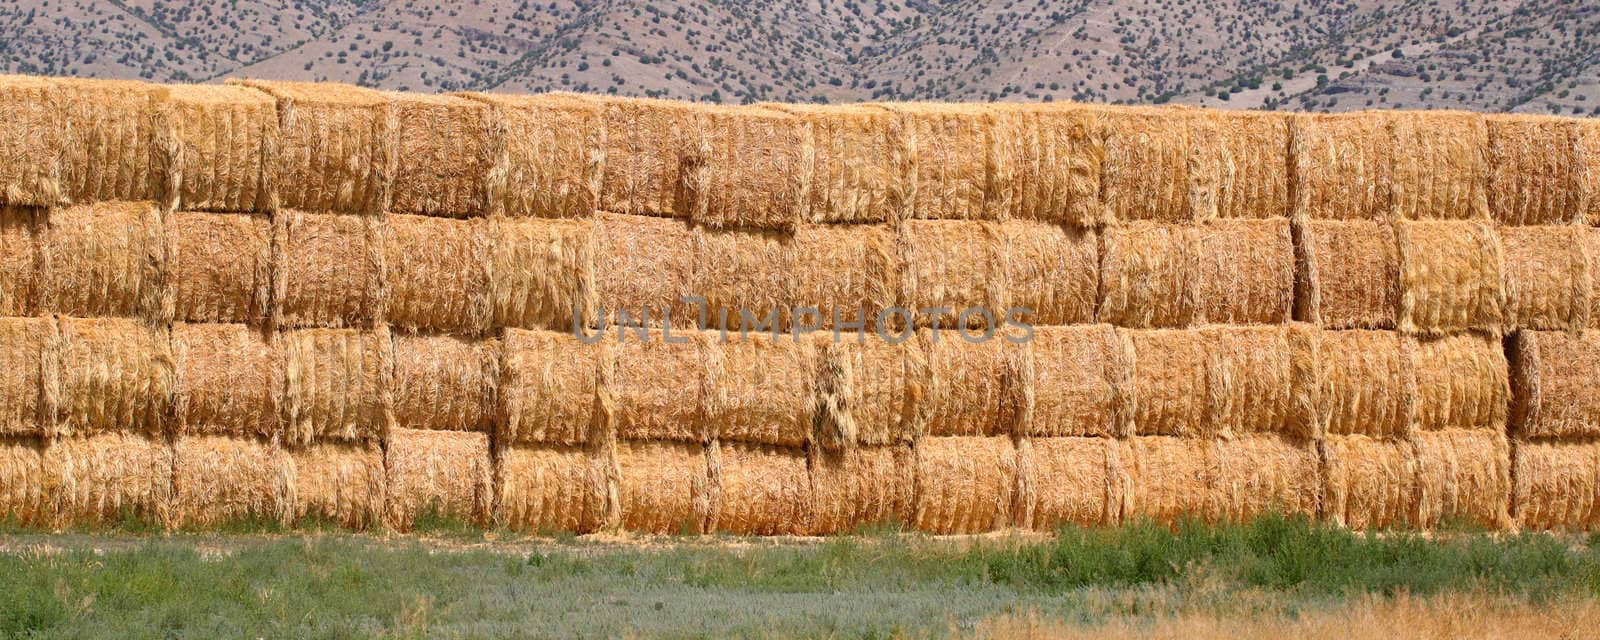 Hay Bale Background by Wirepec